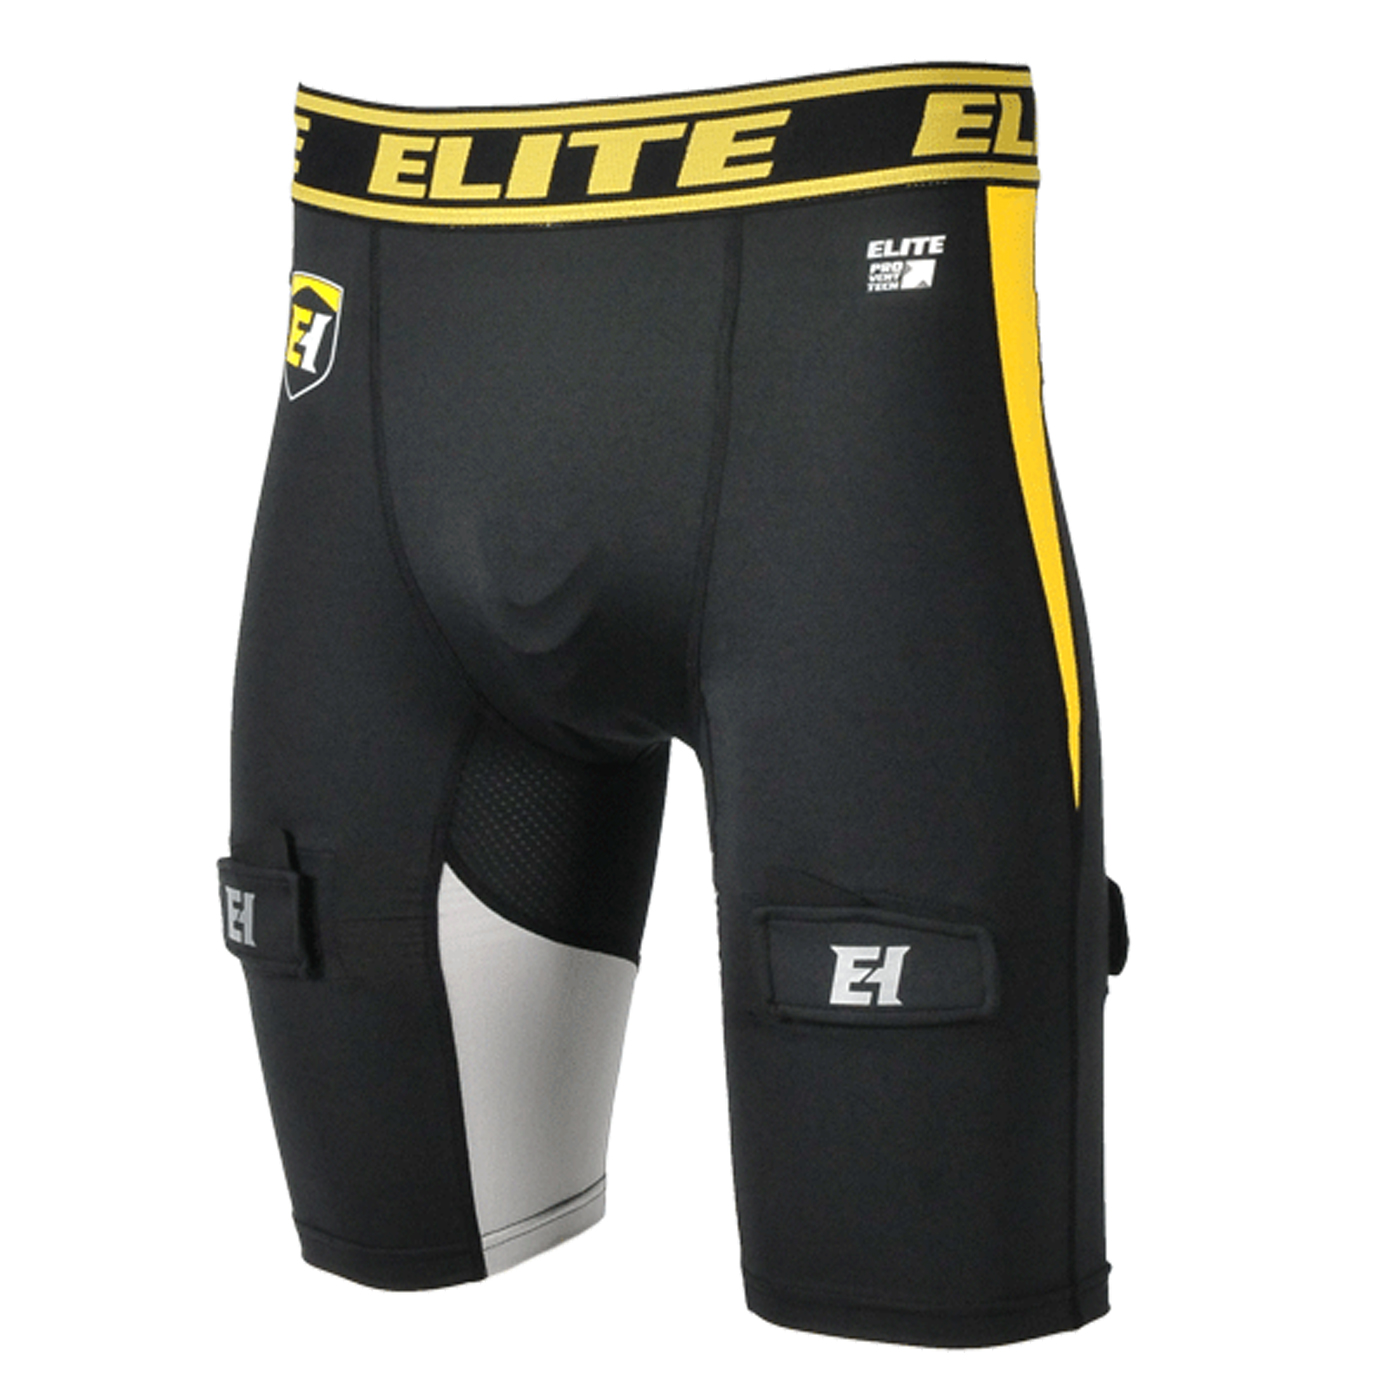 Youth Compression Jock Short W/Cup